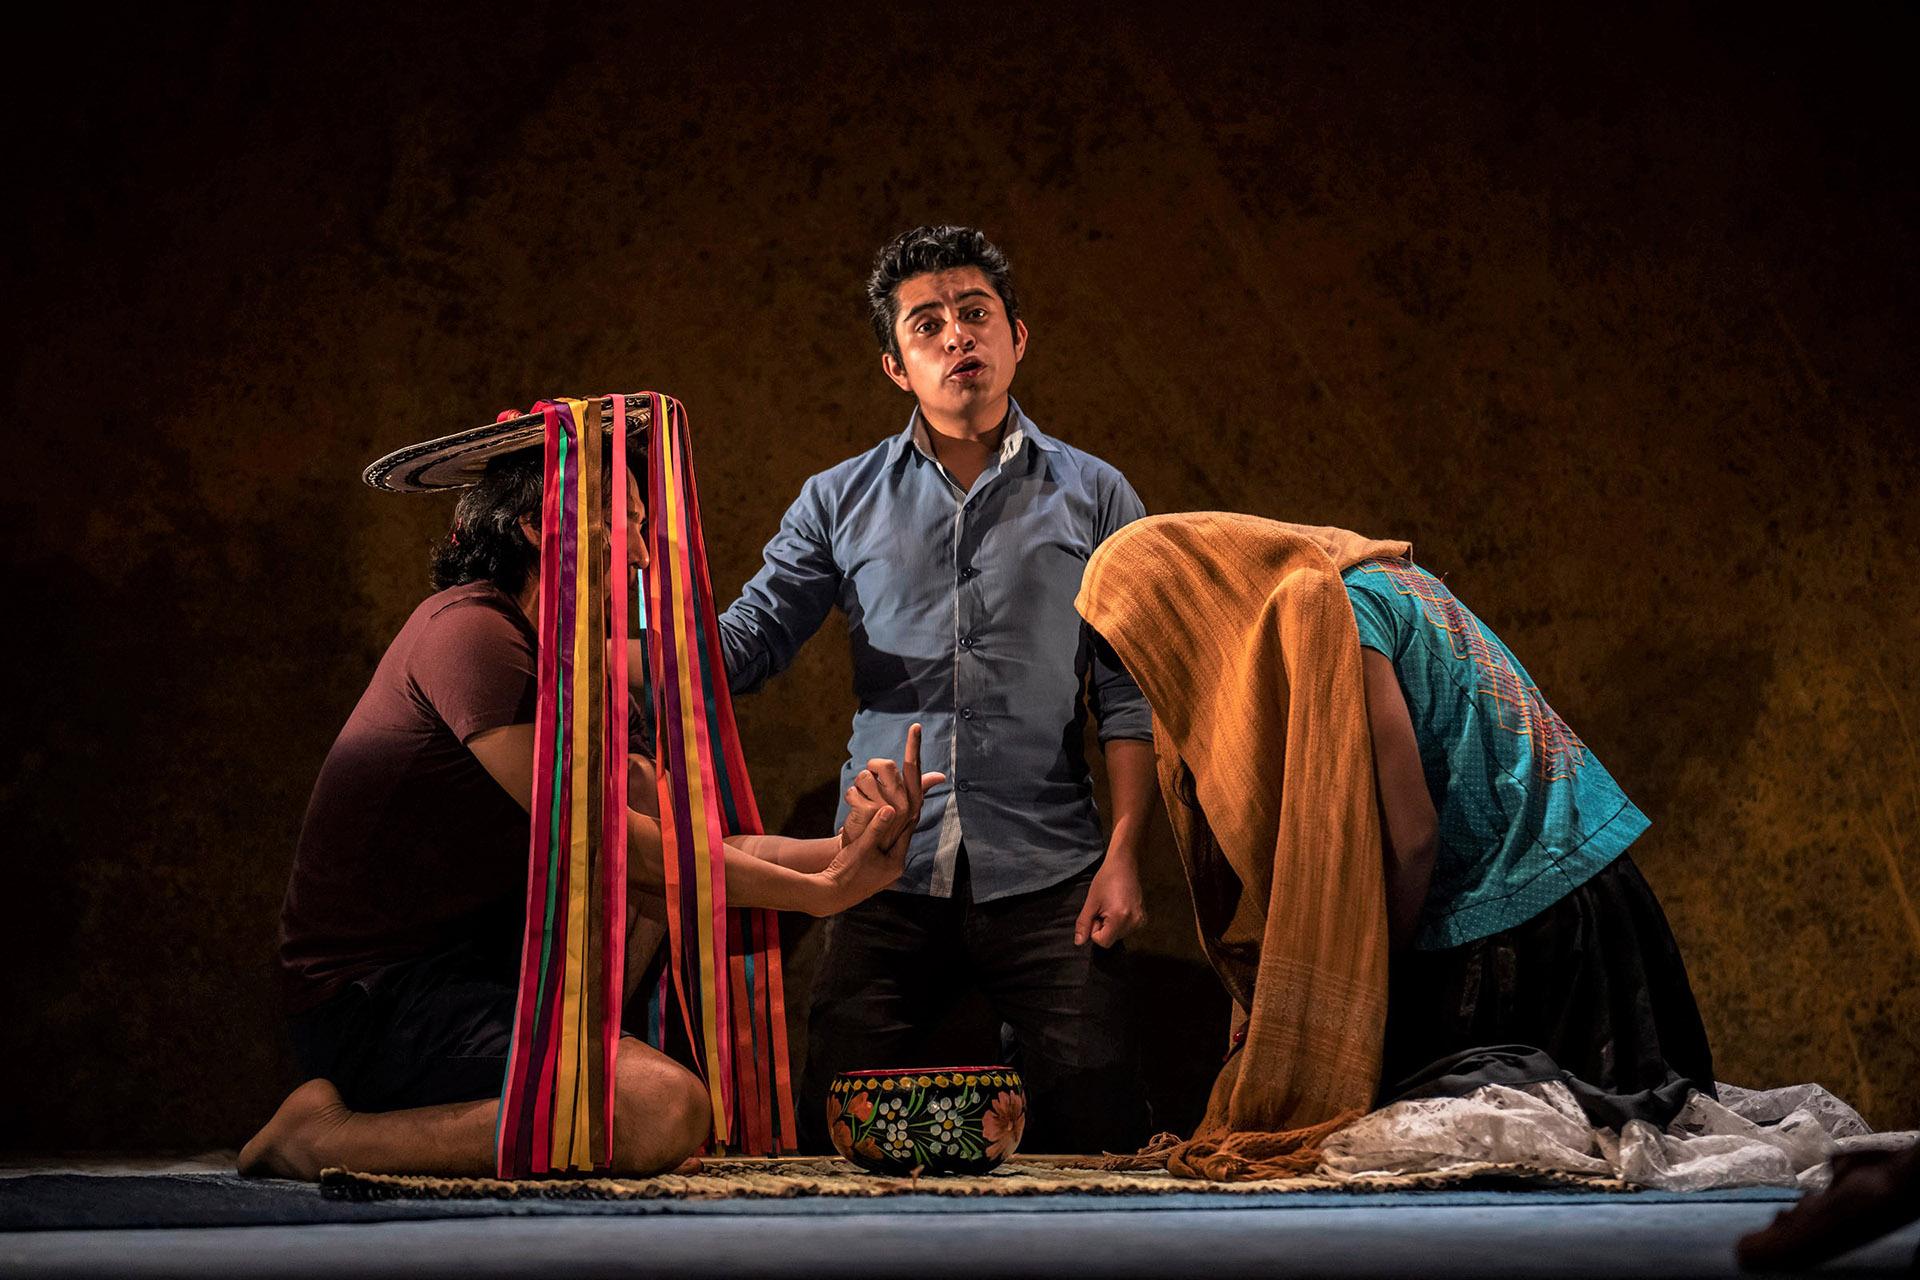 Josué Maychi (from left), Lupe de la Cruz, and Alexis Orozco (who was unable to join the Chicago production and has been replaced by Domingo Mijangos) perform in “Andares.” (Photo by Raúl Kigra)